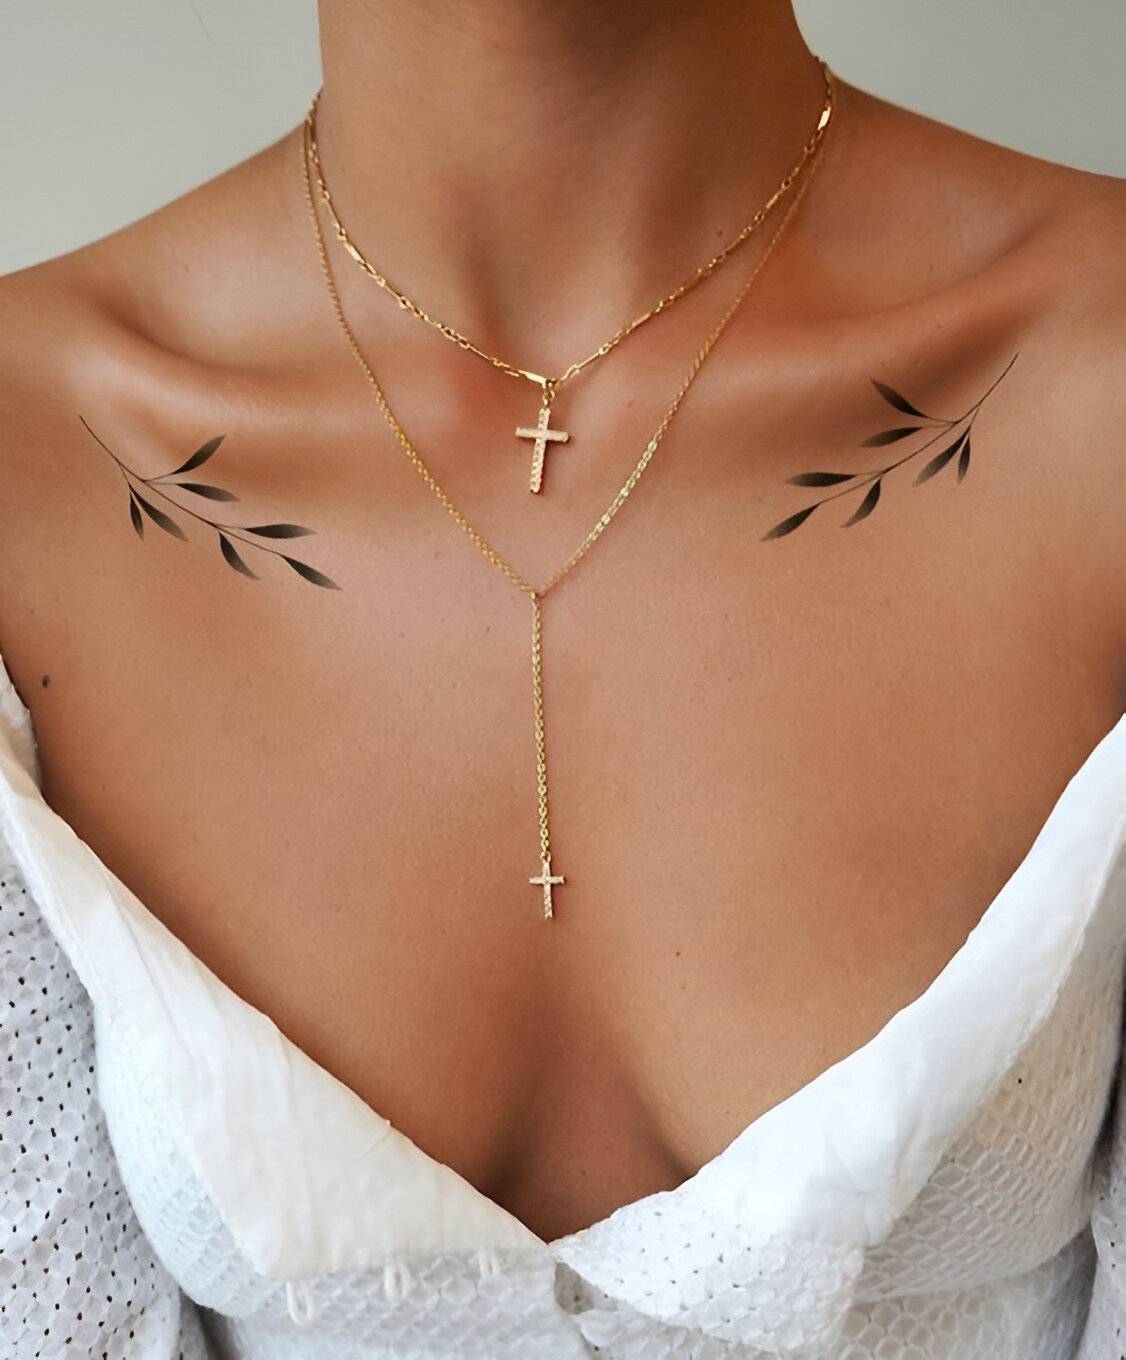 27 Elegant Chest Tattoos For Women To Elevate Their Beauty 19